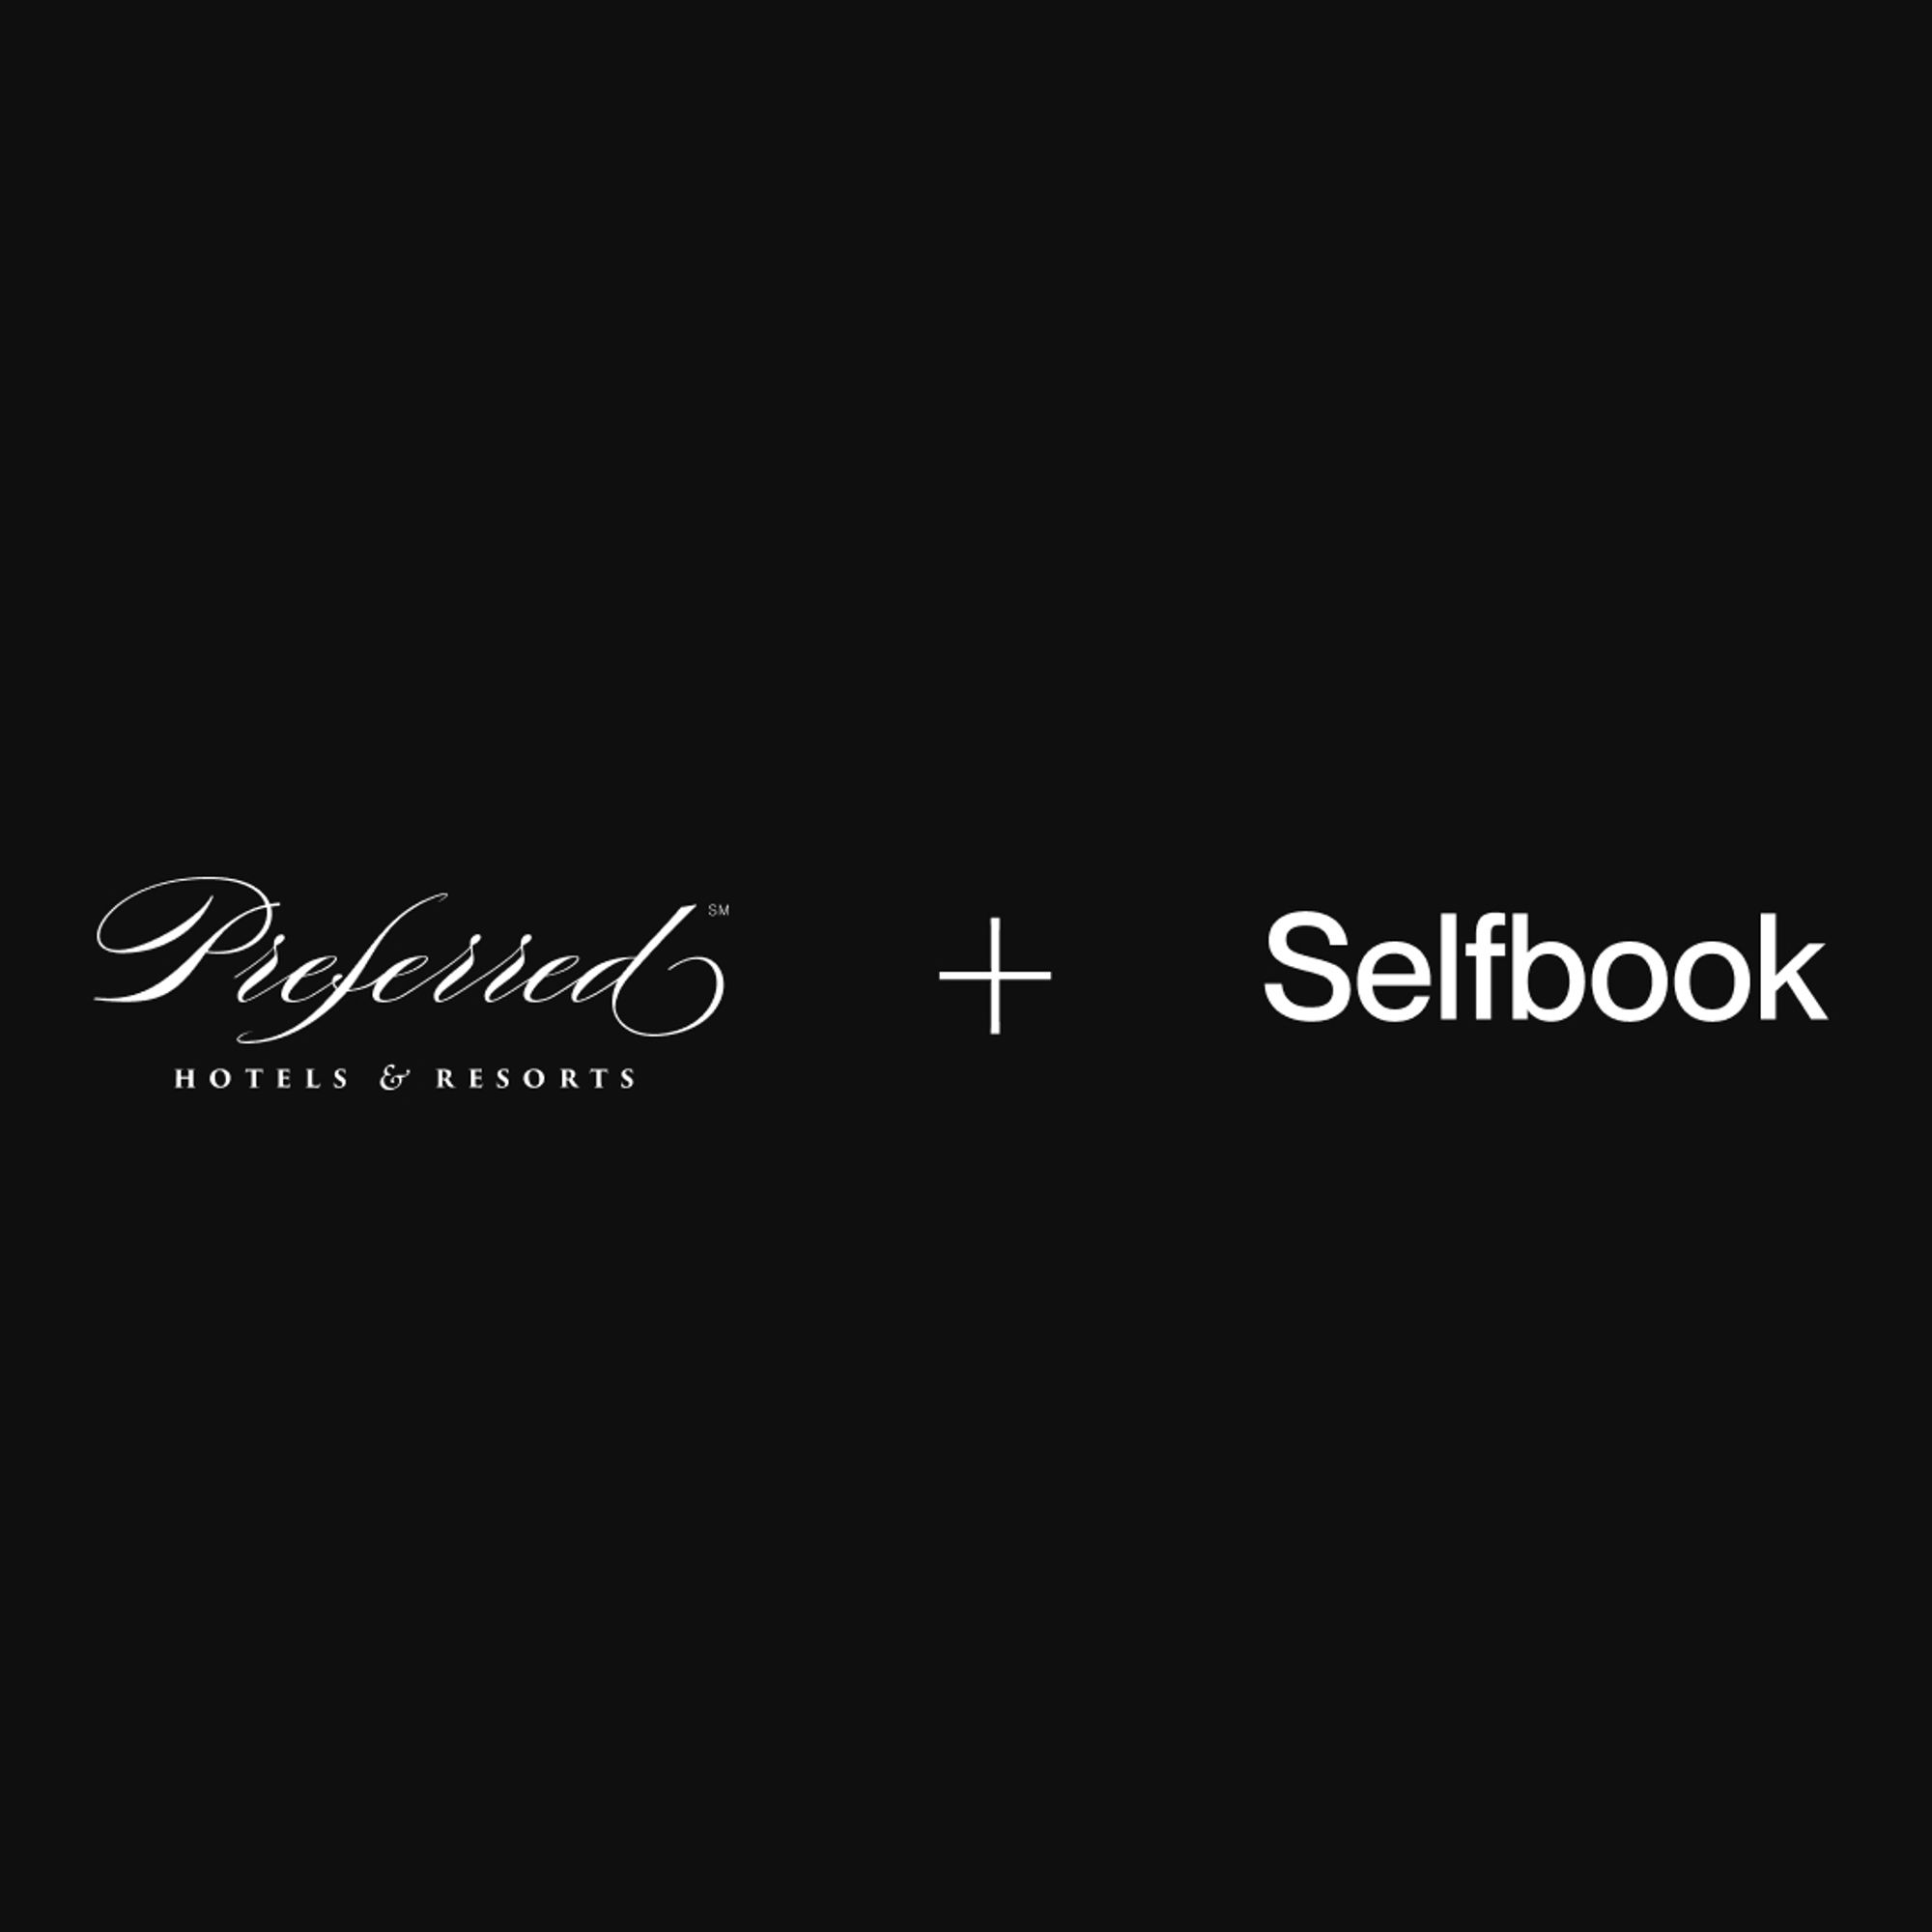 Selfbook and Preferred Hotels & Resorts Renew Alliance Partnership for Third Consecutive Year